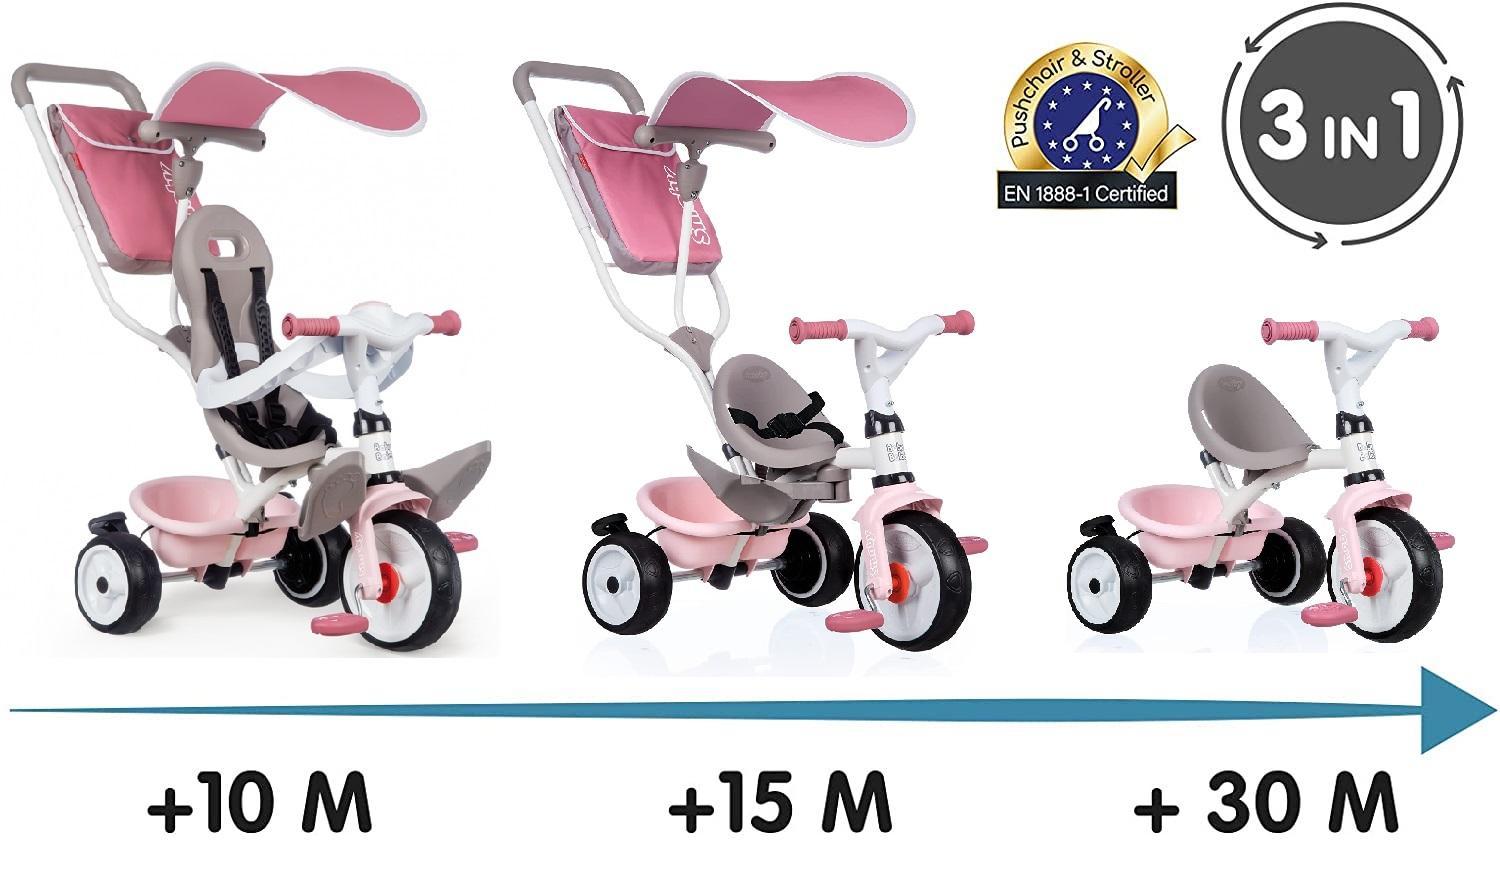 smoby triciclo rosa baby balade 3 in 1